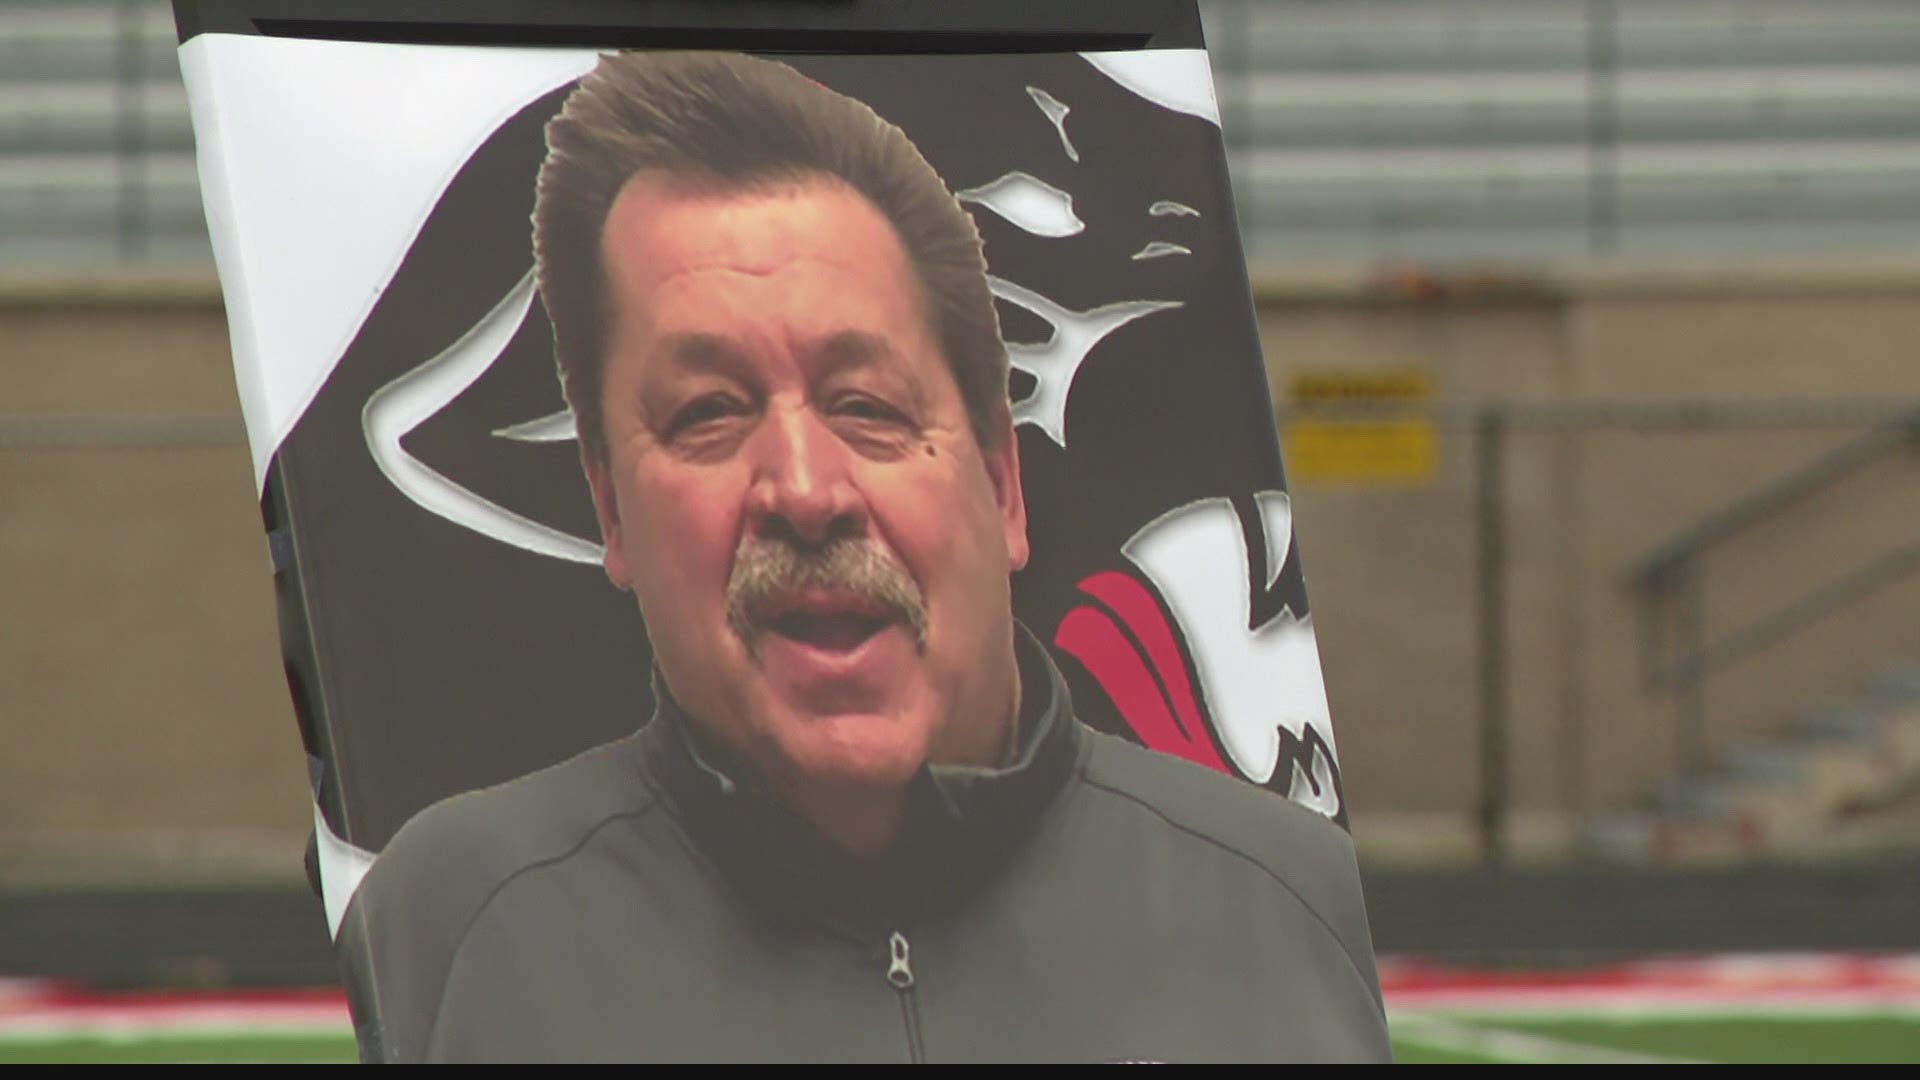 The North Central community came together to remember former athletic director Paul Loggan Friday evening.